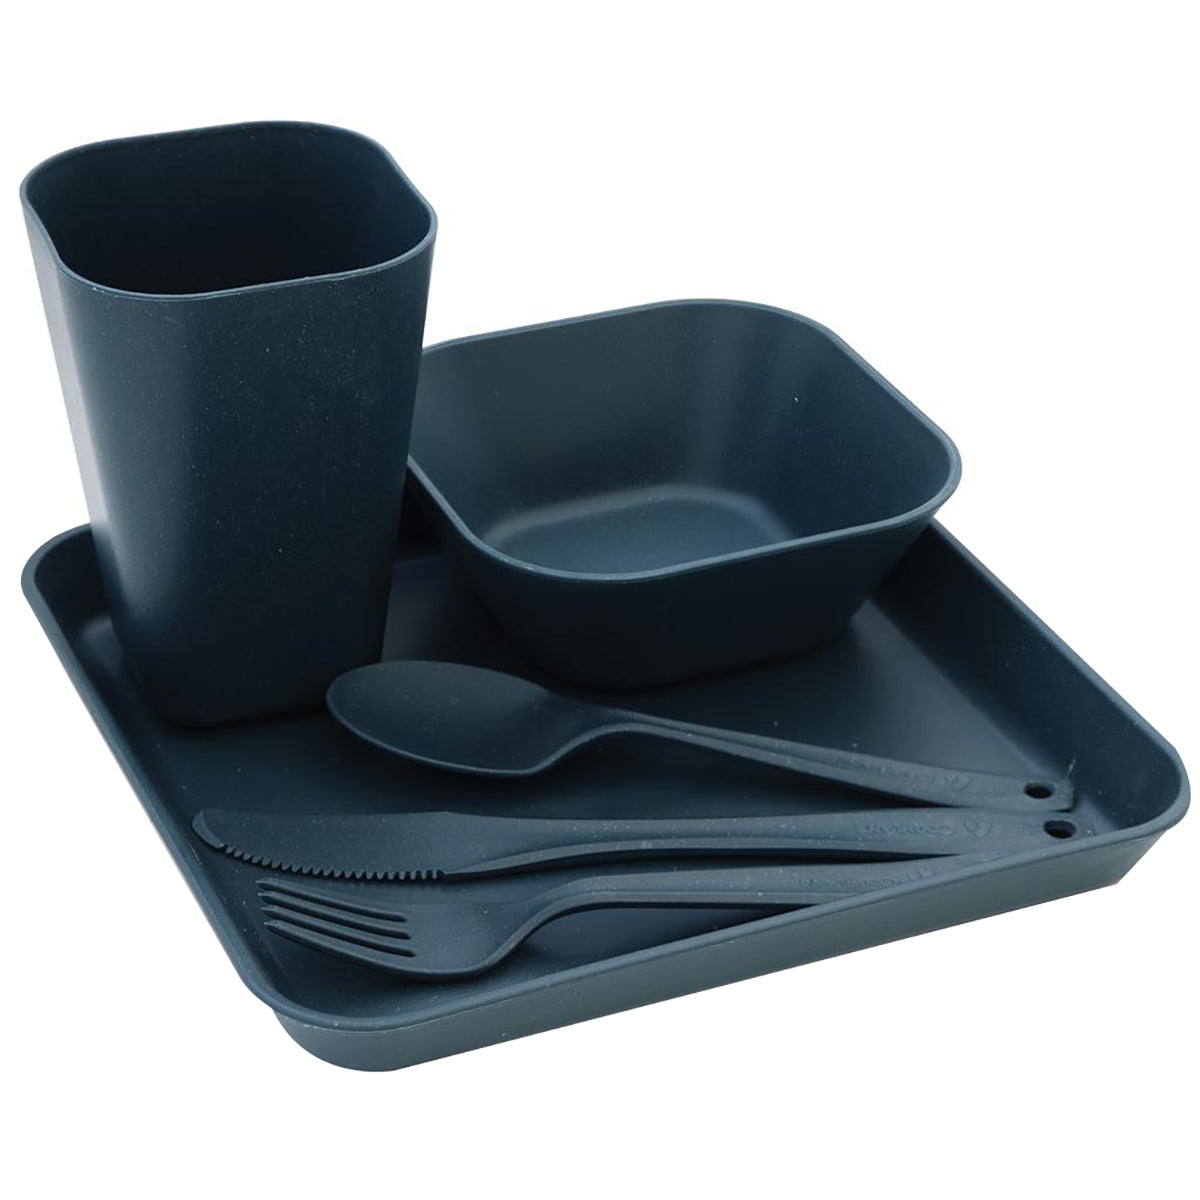 Coghlan's Outdoor Camping Solo Tableware Kit - Blue Coghlan's